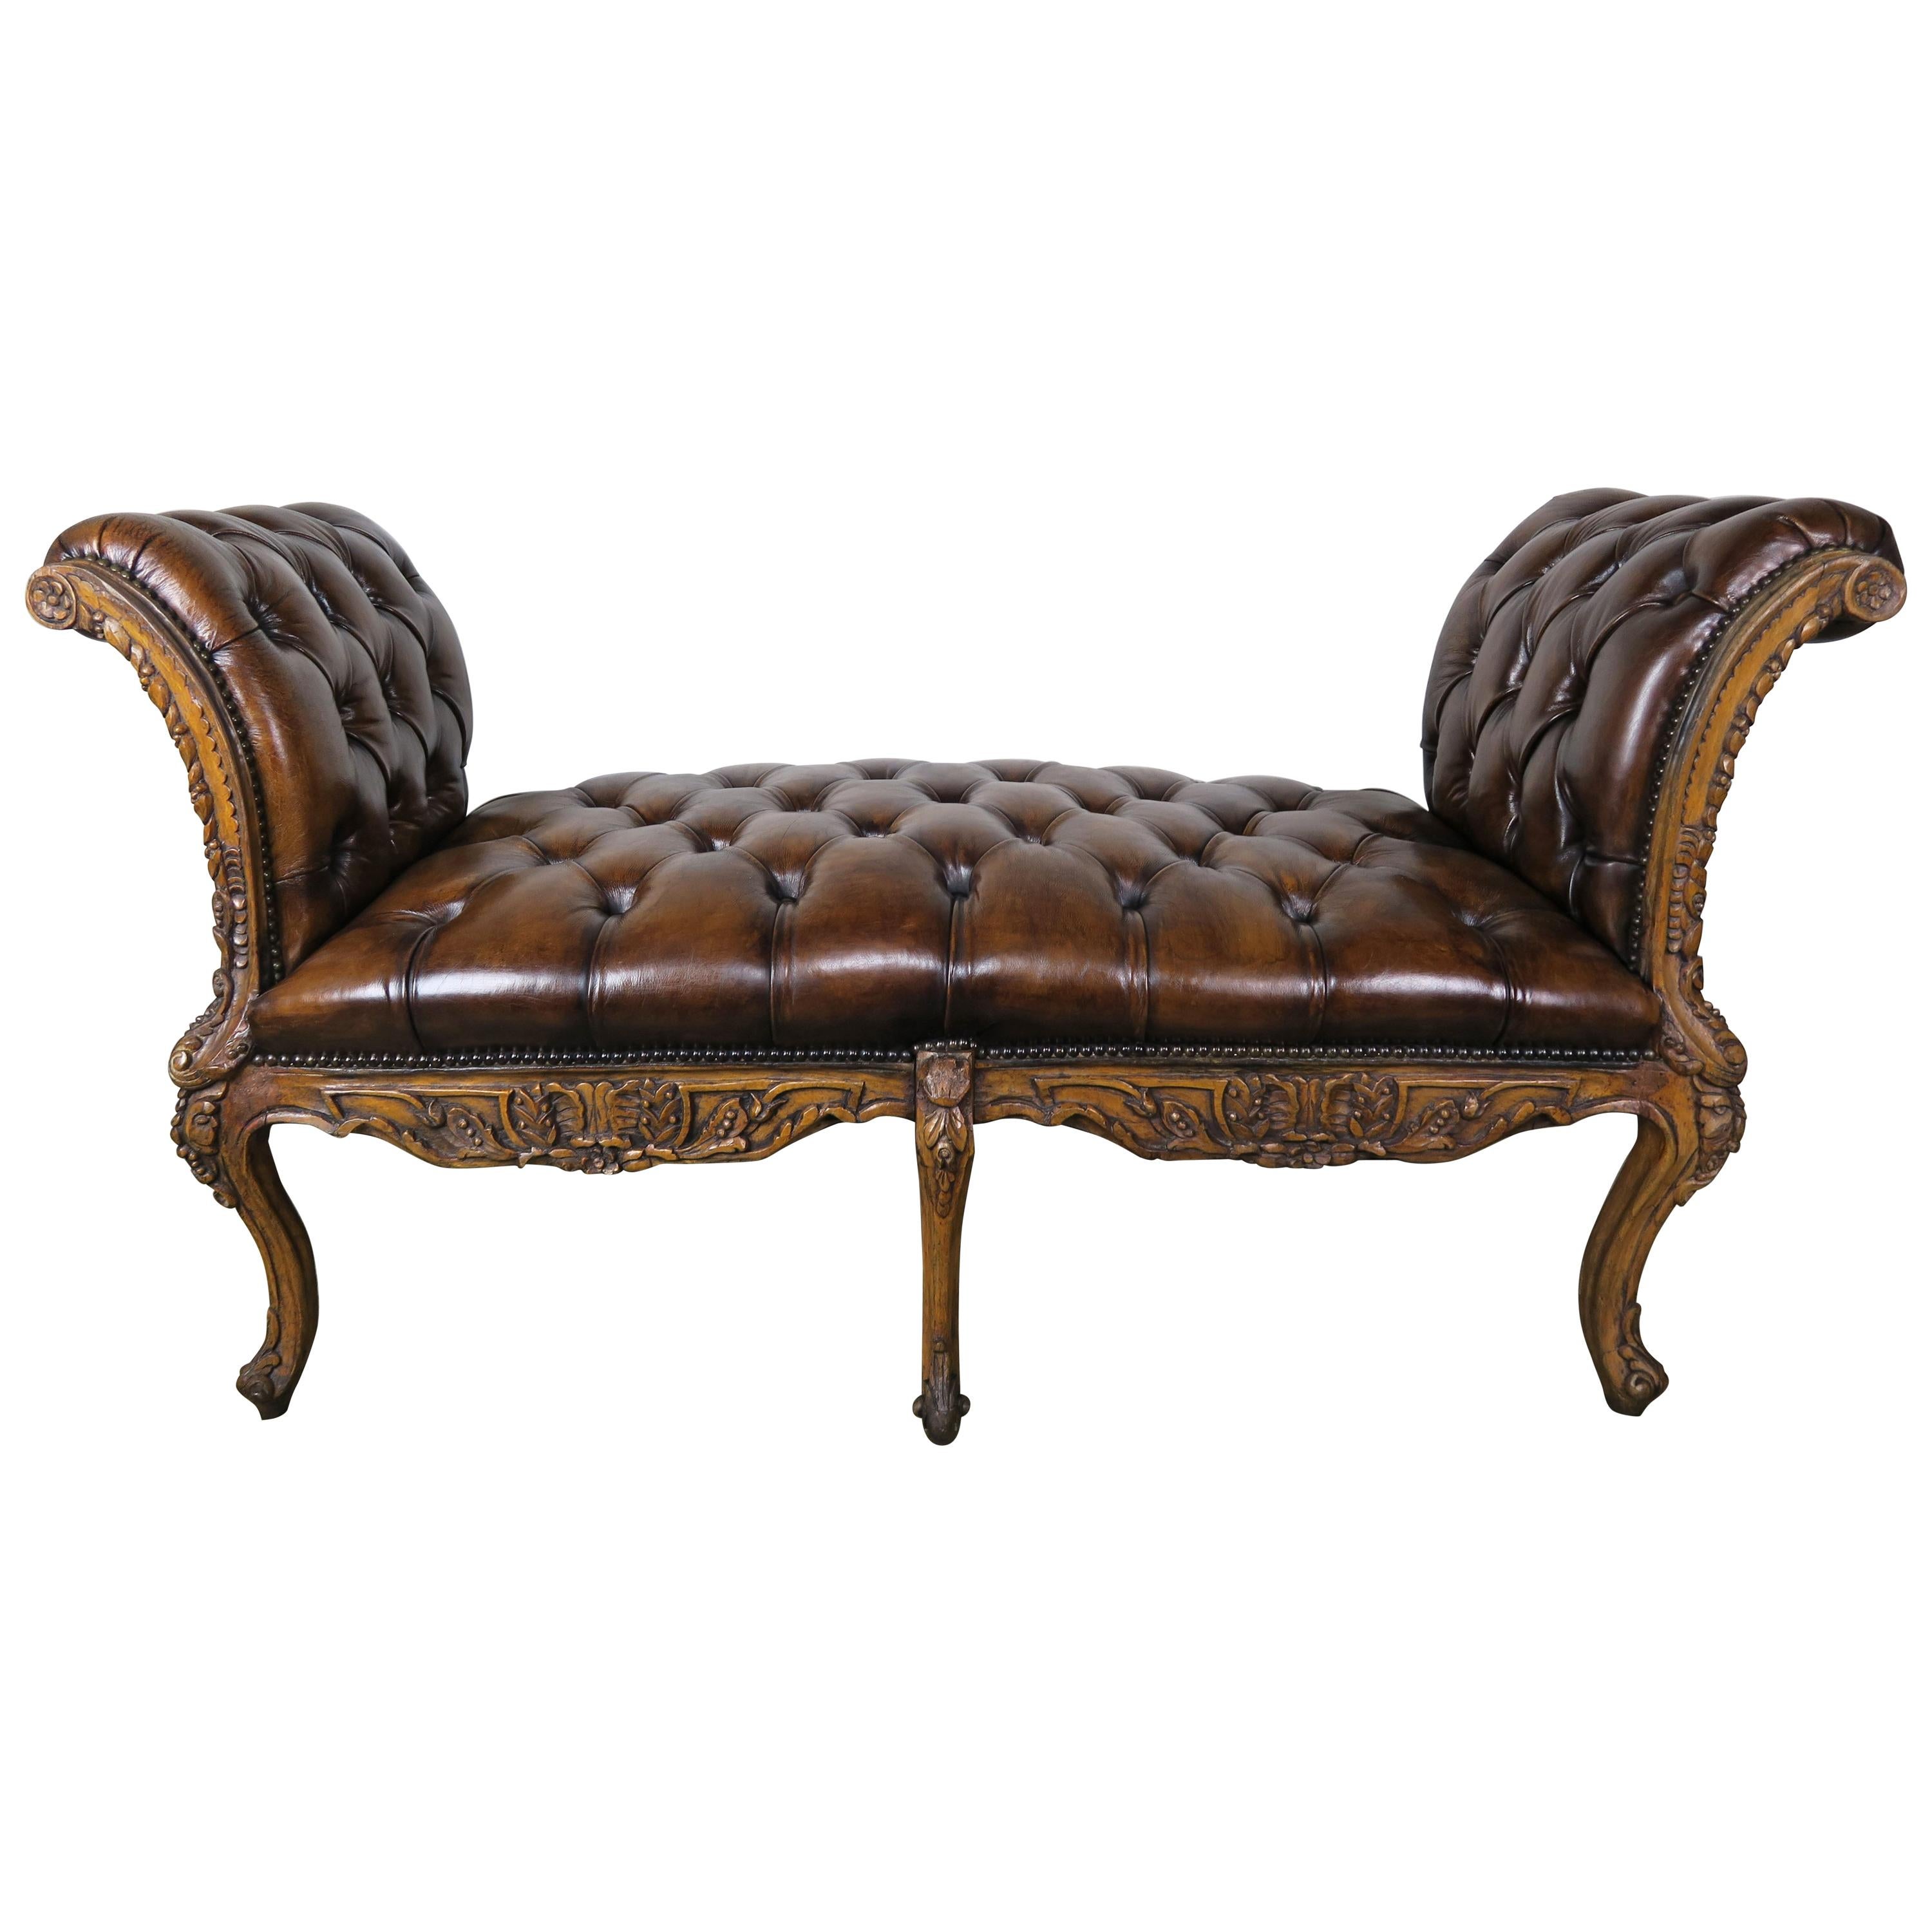 19th Century French Leather Six-Legged Tufted Bench